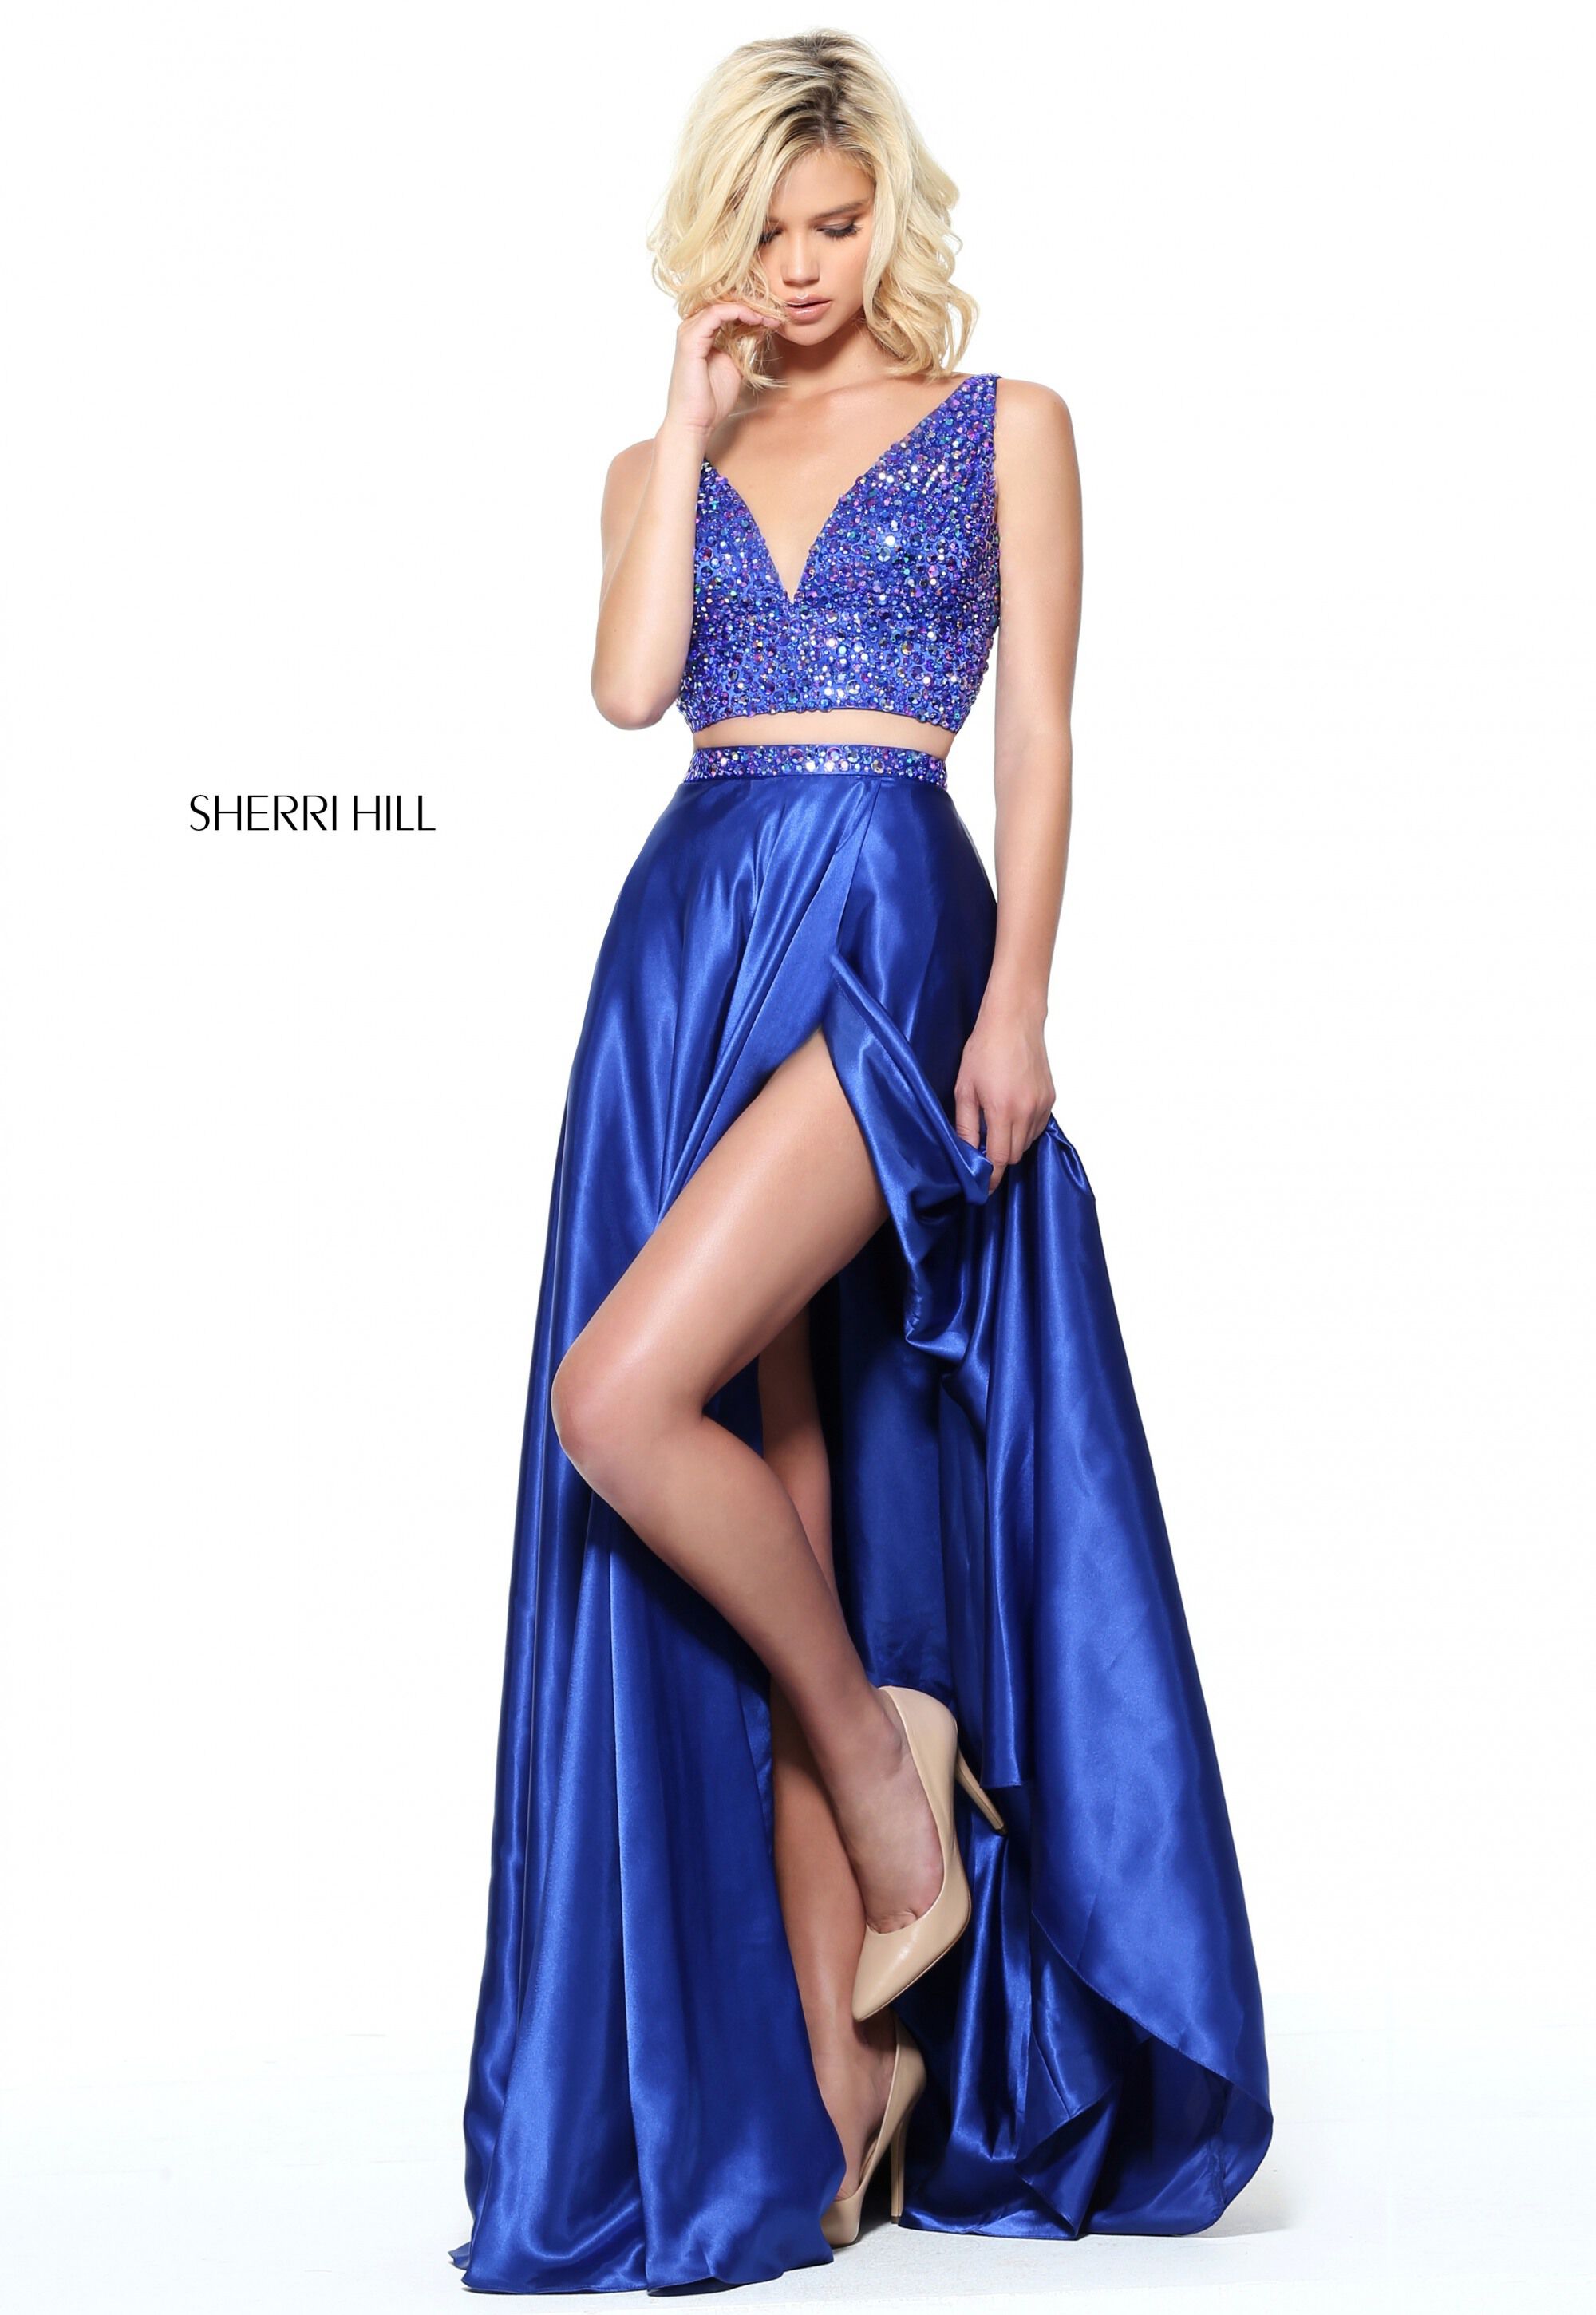 style № 50993 designed by SherriHill